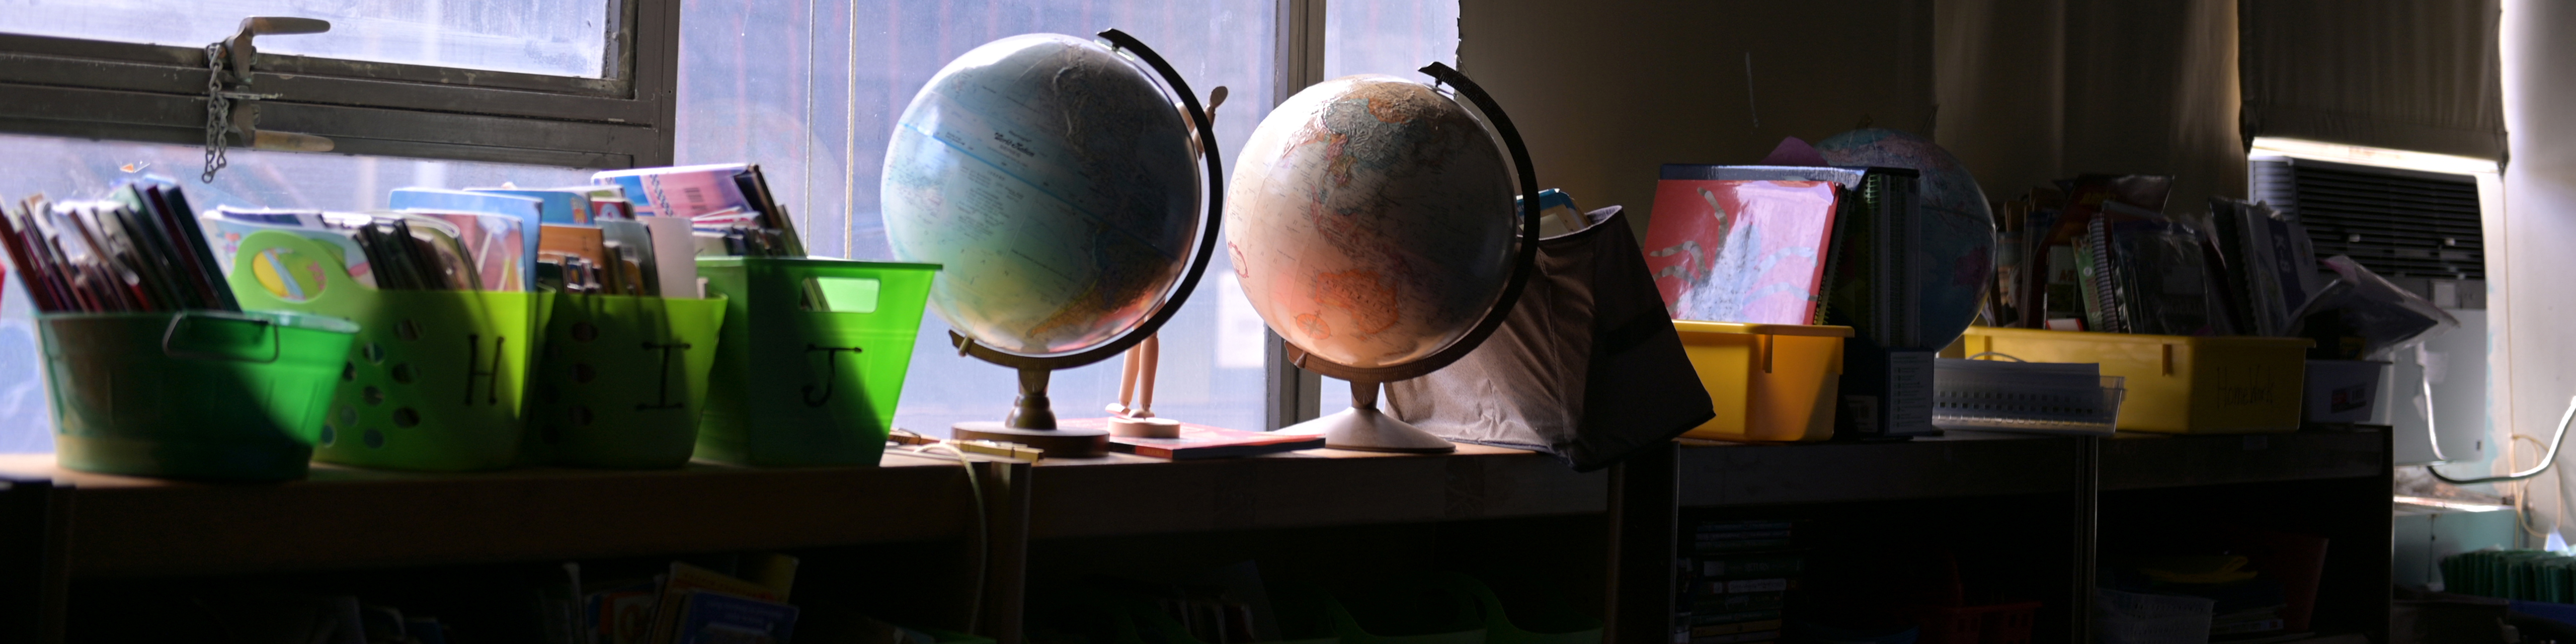 A classroom is empty with the lights off with books, globes, and other supplies seen in shadow against a window